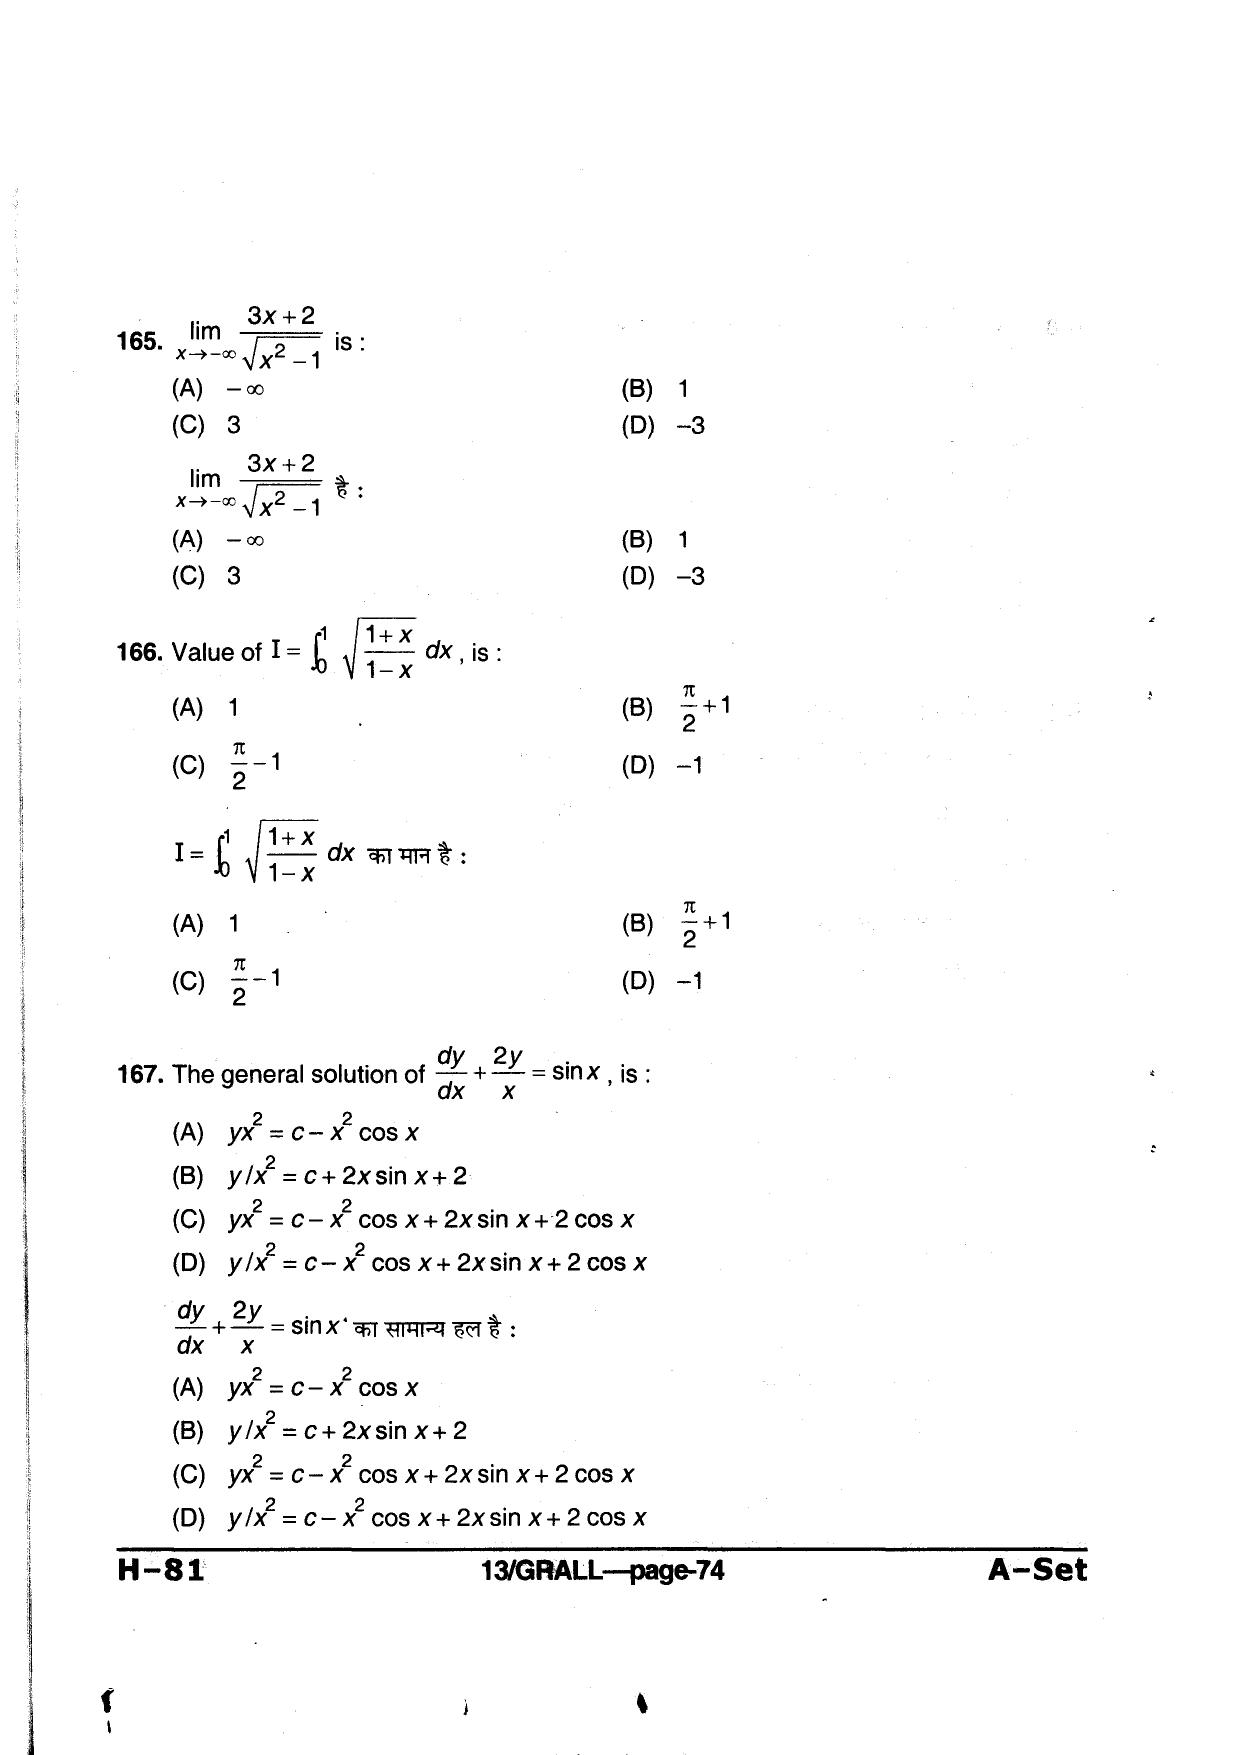 MP PAT 2013 Question Paper - Paper I - Page 74